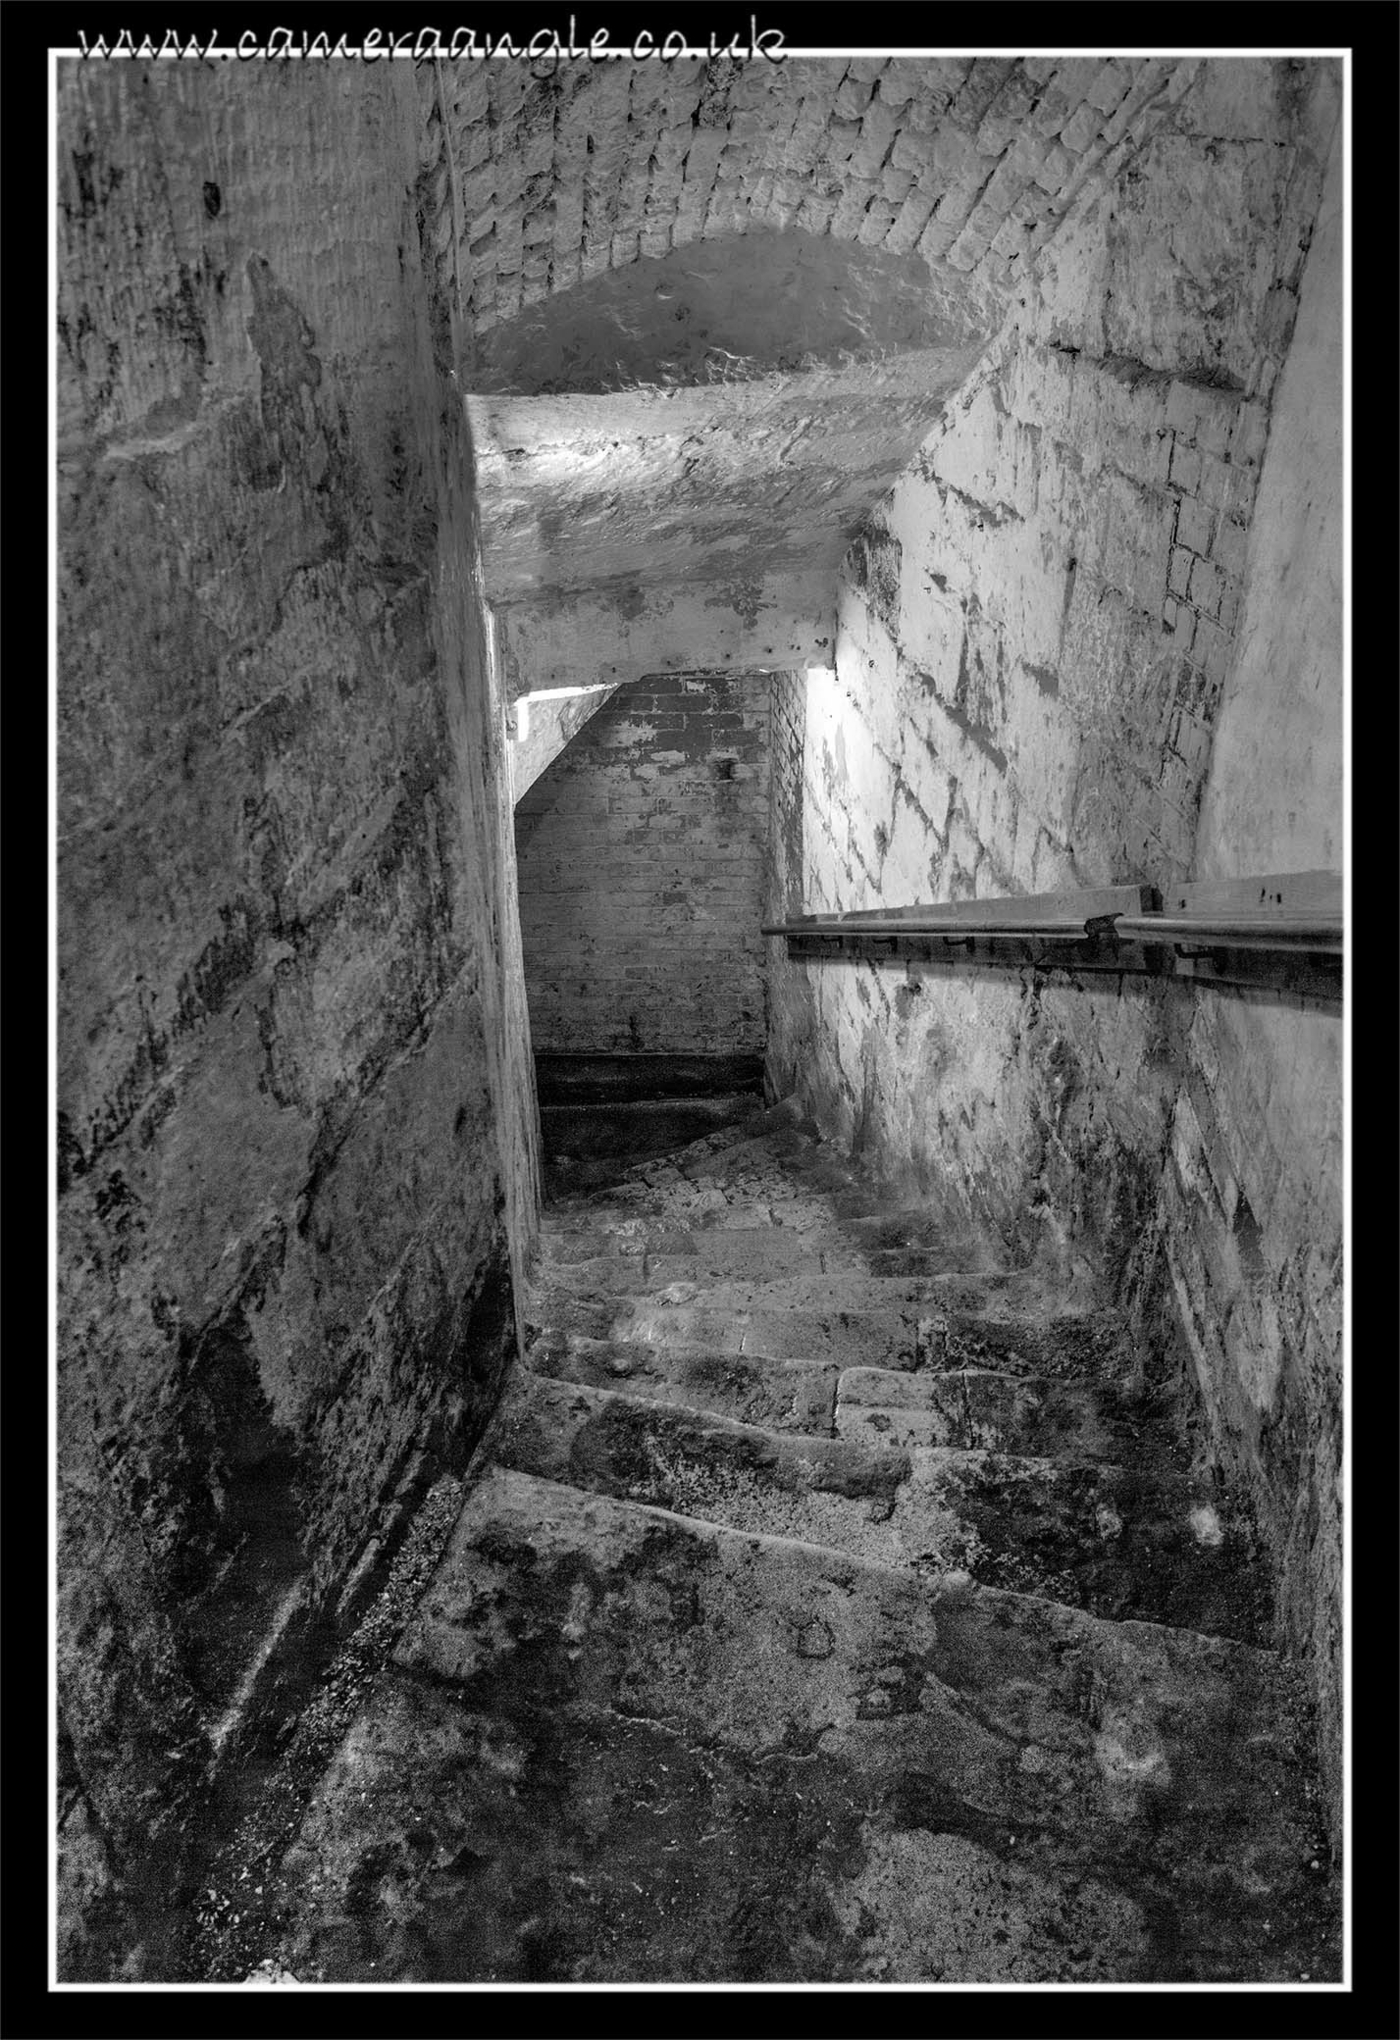 Stairs
Keywords: stairs Hurst Castle